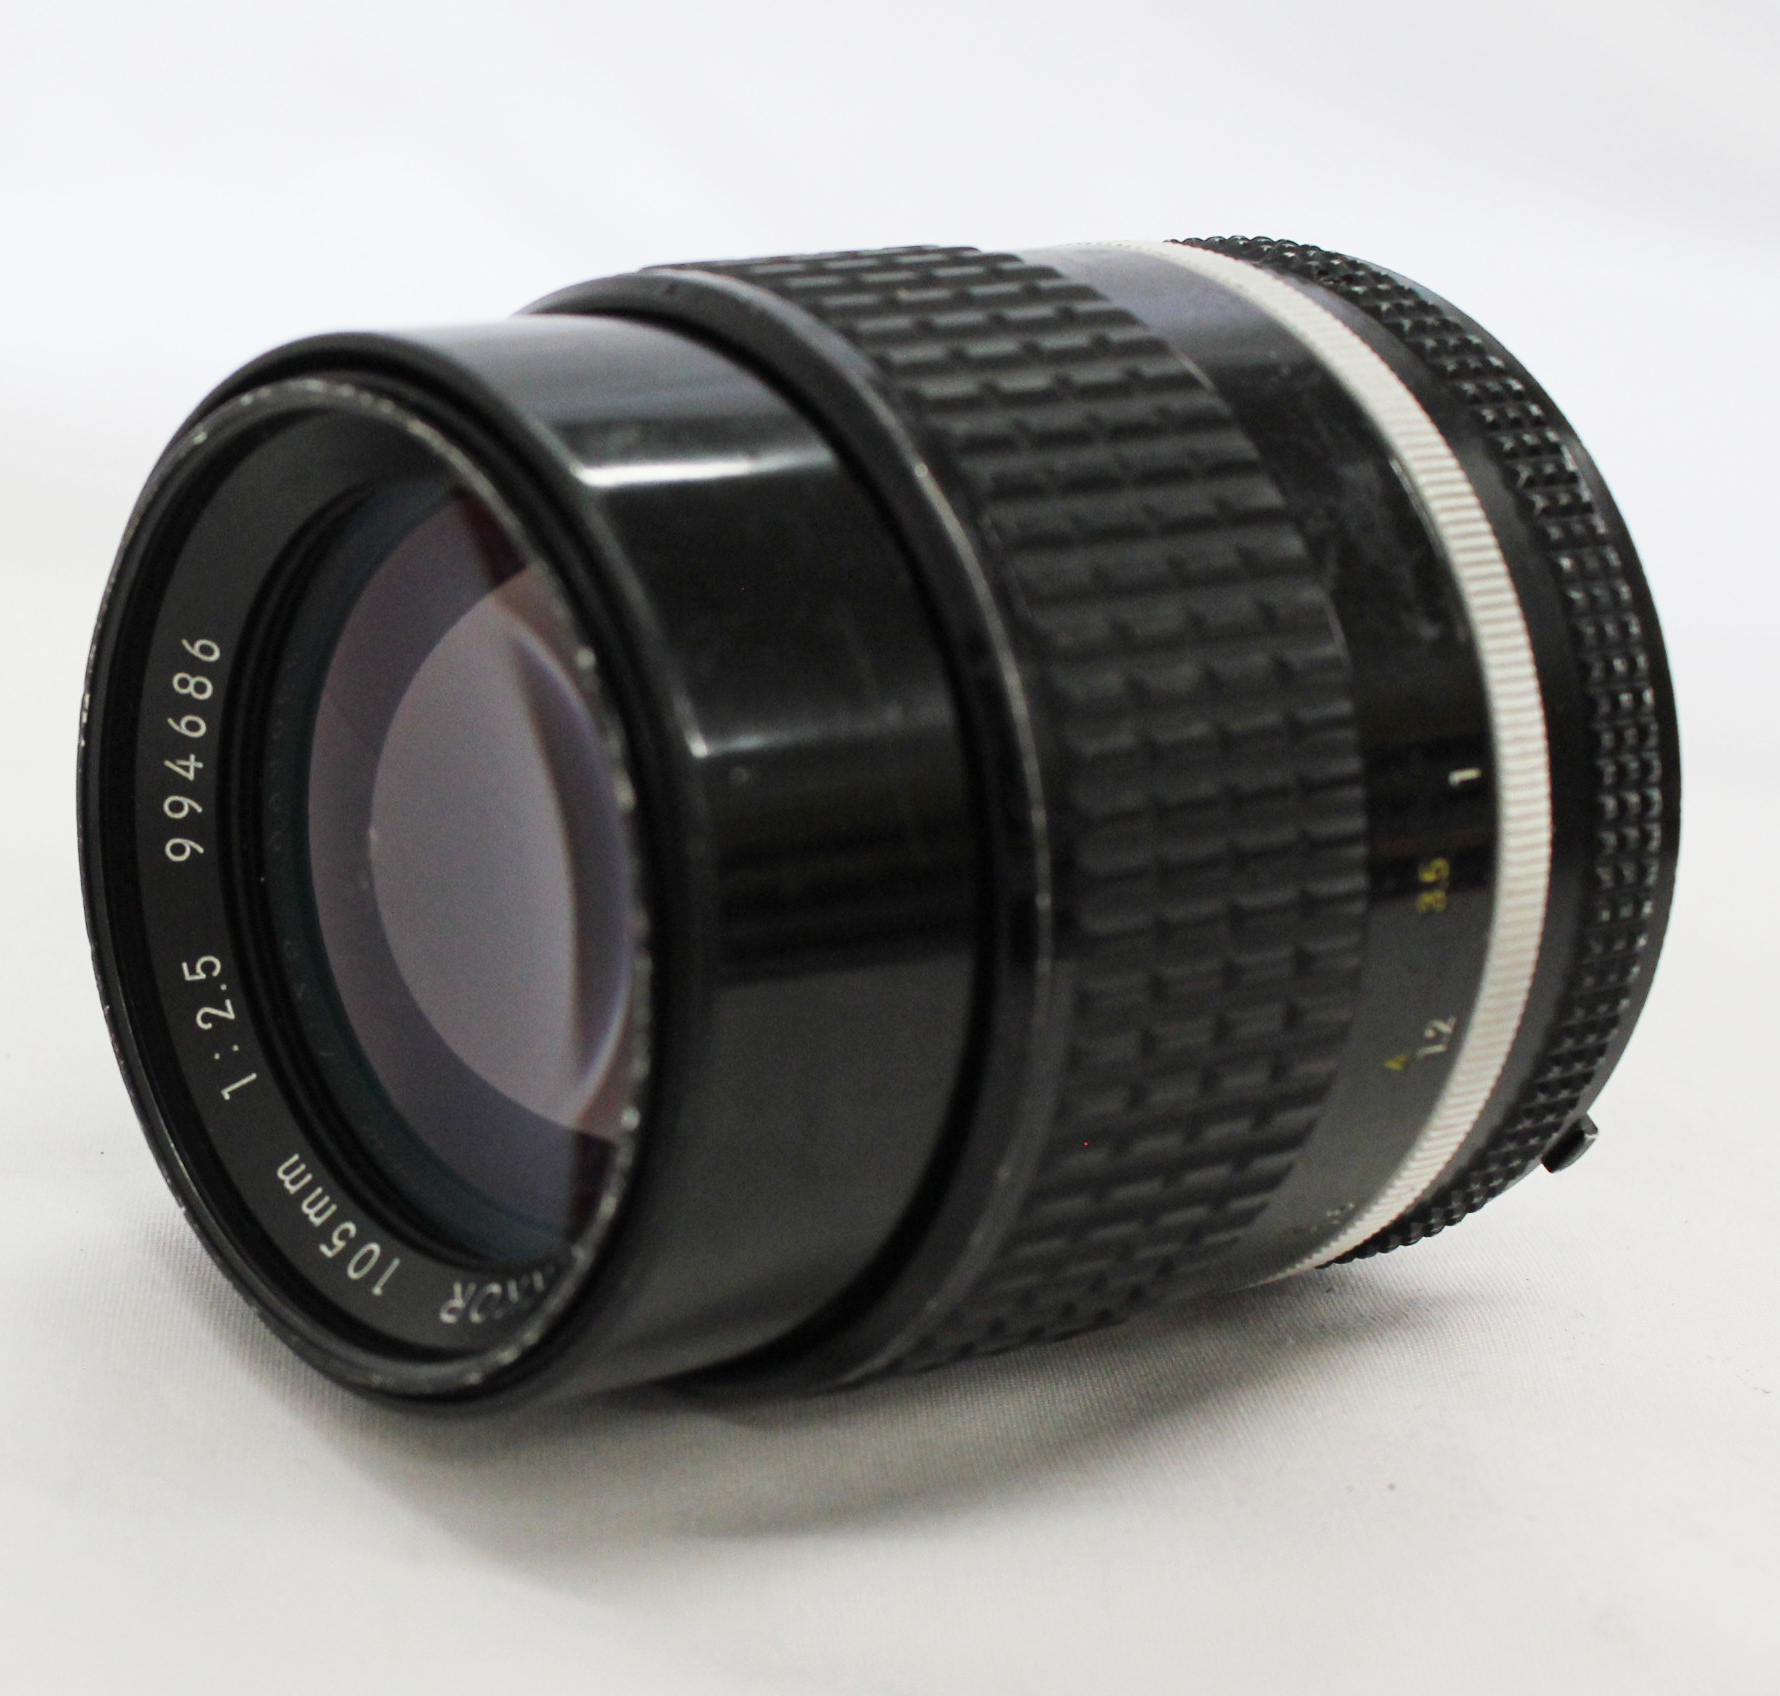  Nikon Nikkor Ai-s AIS 105mm F/2.5 Lens for F Mount SLR from Japan Photo 1